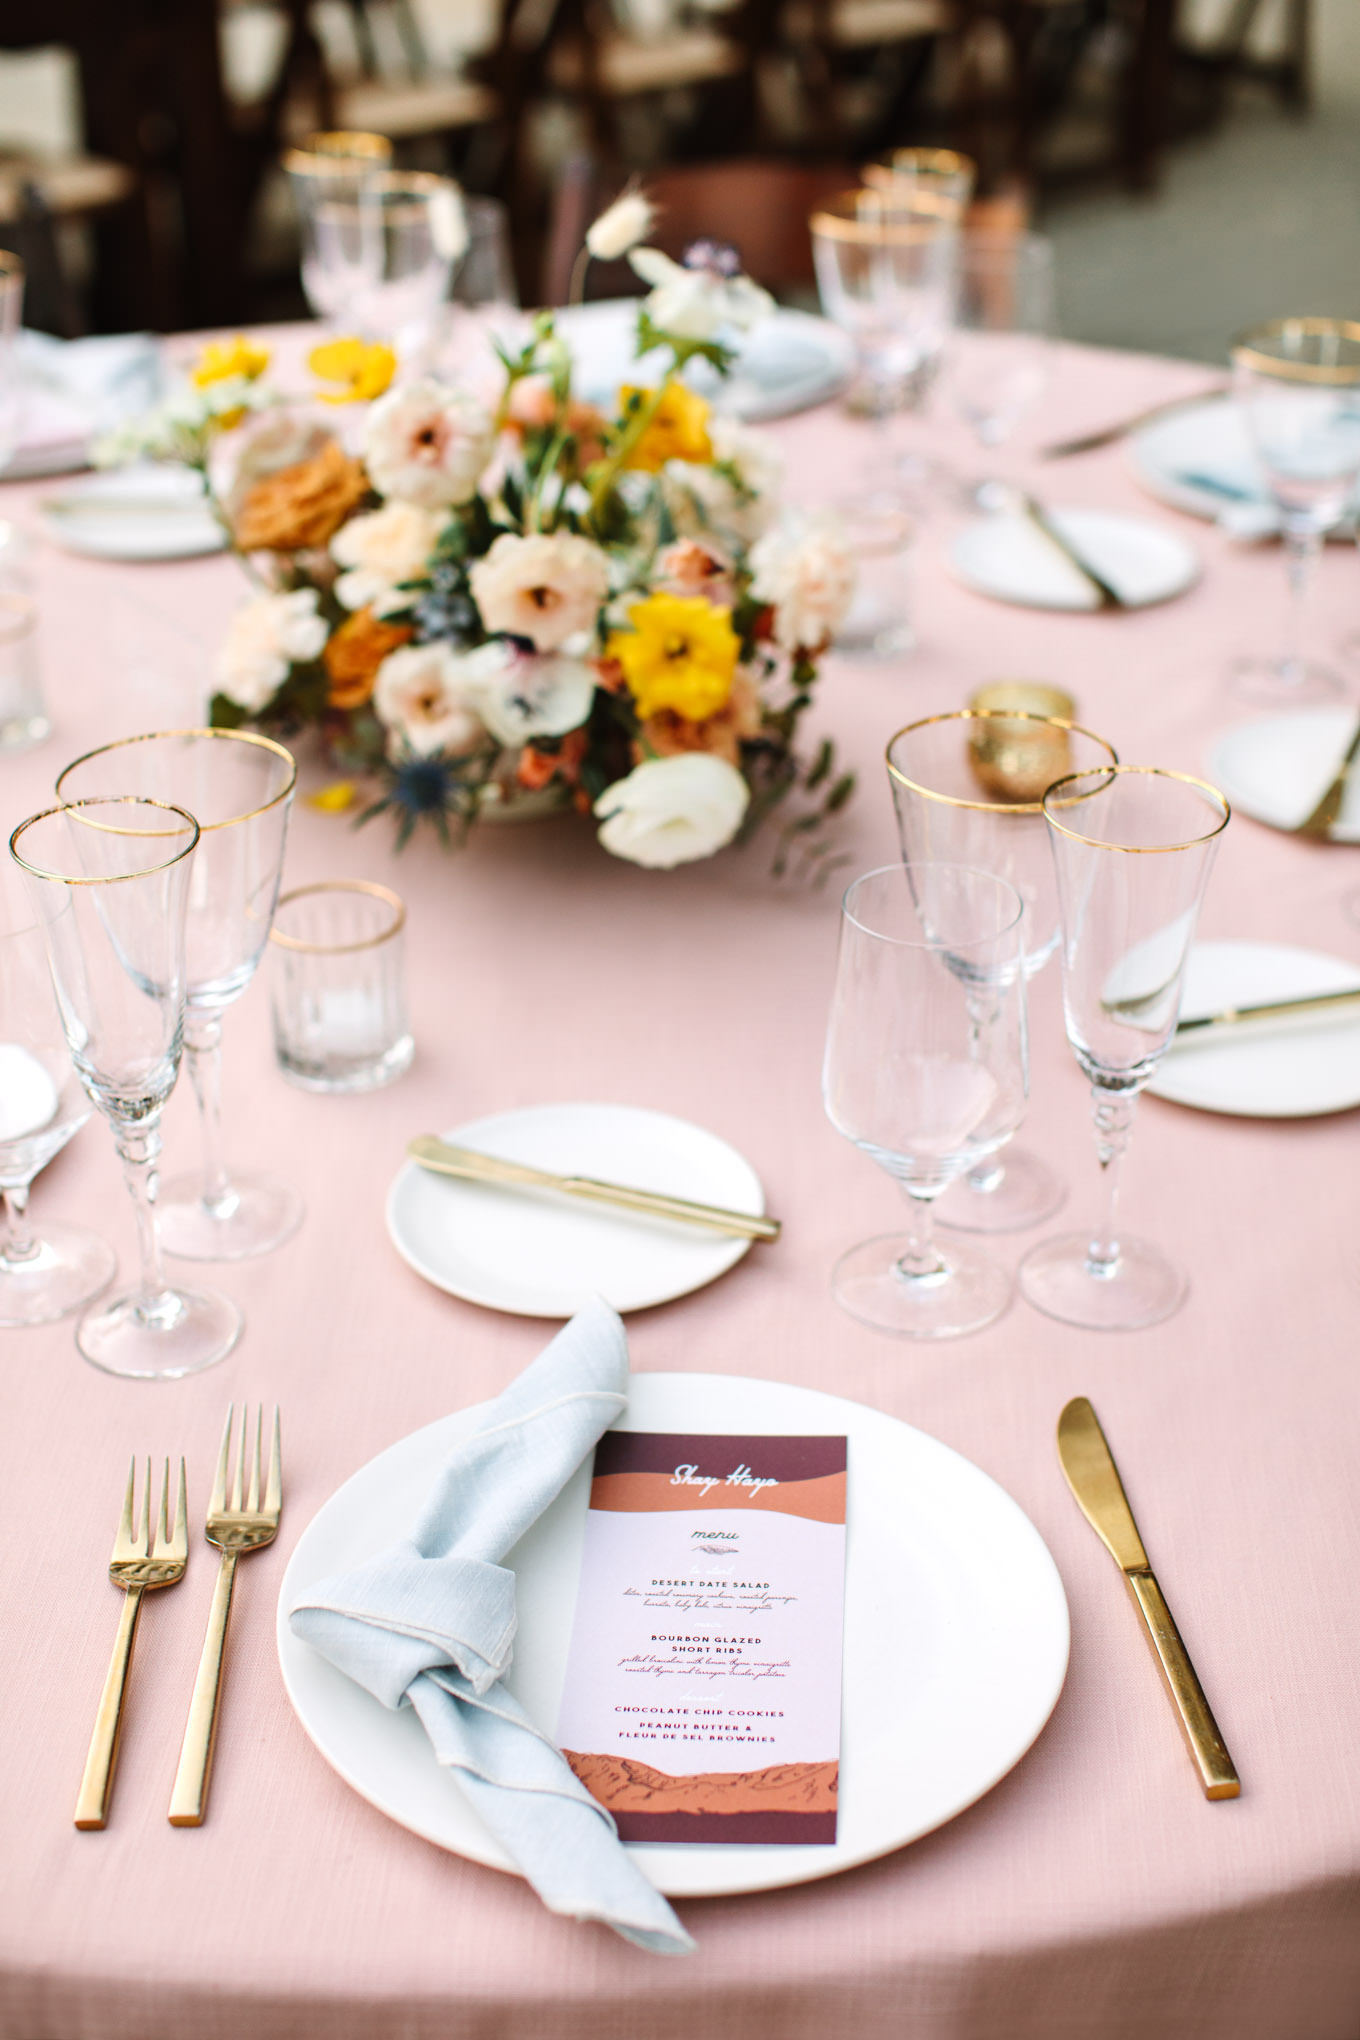 Blush wedding reception table | Living Desert Zoo & Gardens wedding with unique details | Elevated and colorful wedding photography for fun-loving couples in Southern California |  #PalmSprings #palmspringsphotographer #gardenwedding #palmspringswedding  Source: Mary Costa Photography | Los Angeles wedding photographer 